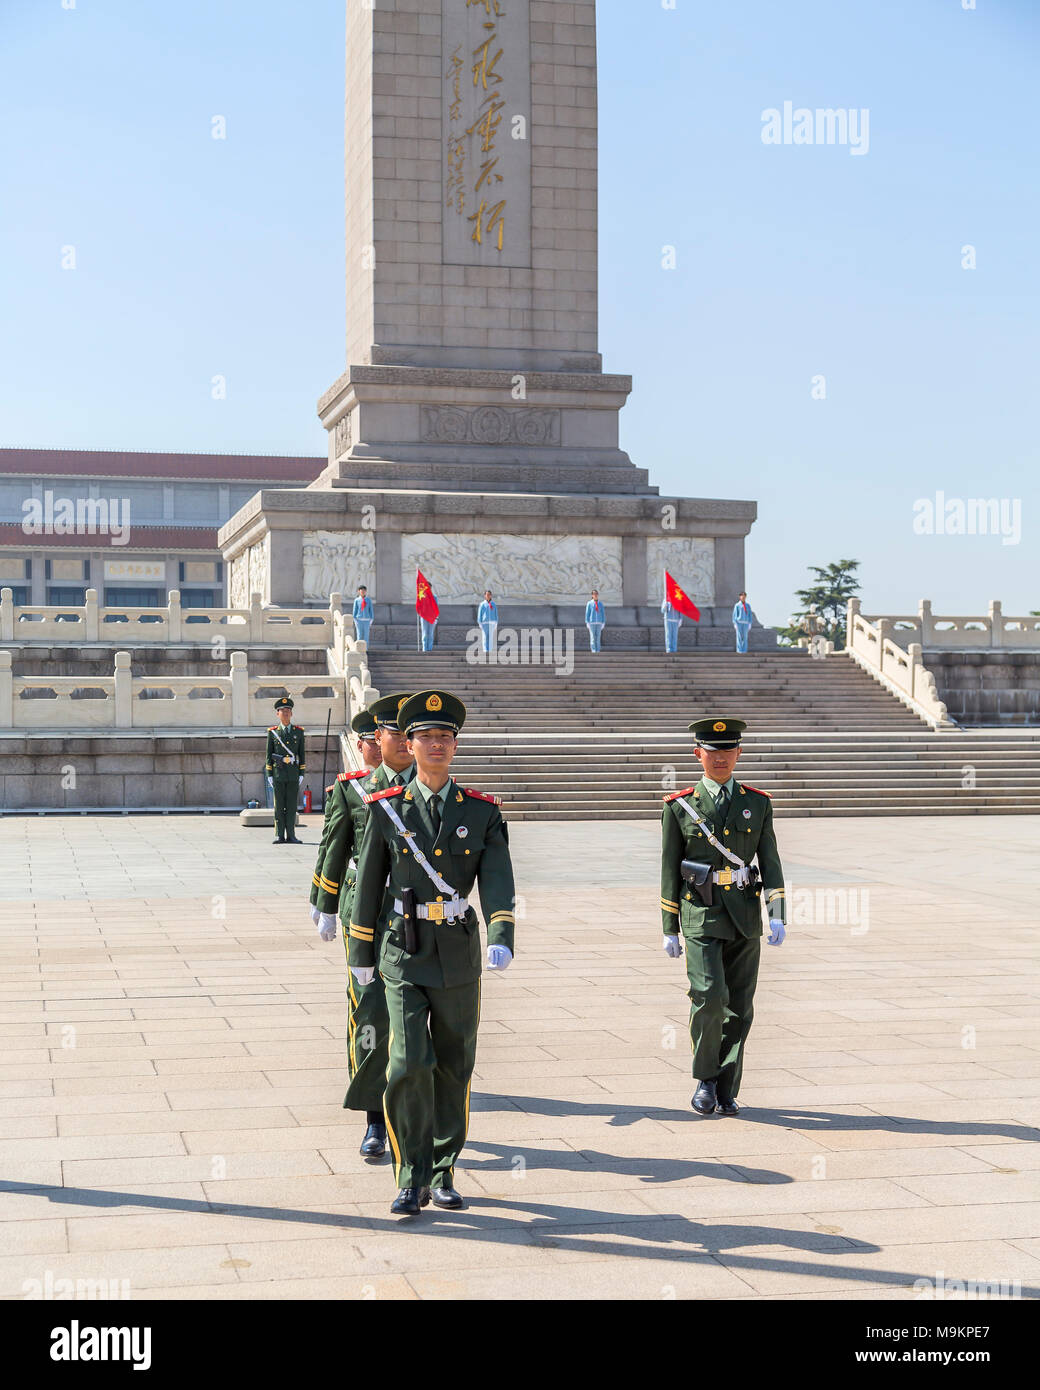 Chinese soldiers marching in front of the Monument to the People's Heroes, Tiananmen Square, Beijing, China Stock Photo